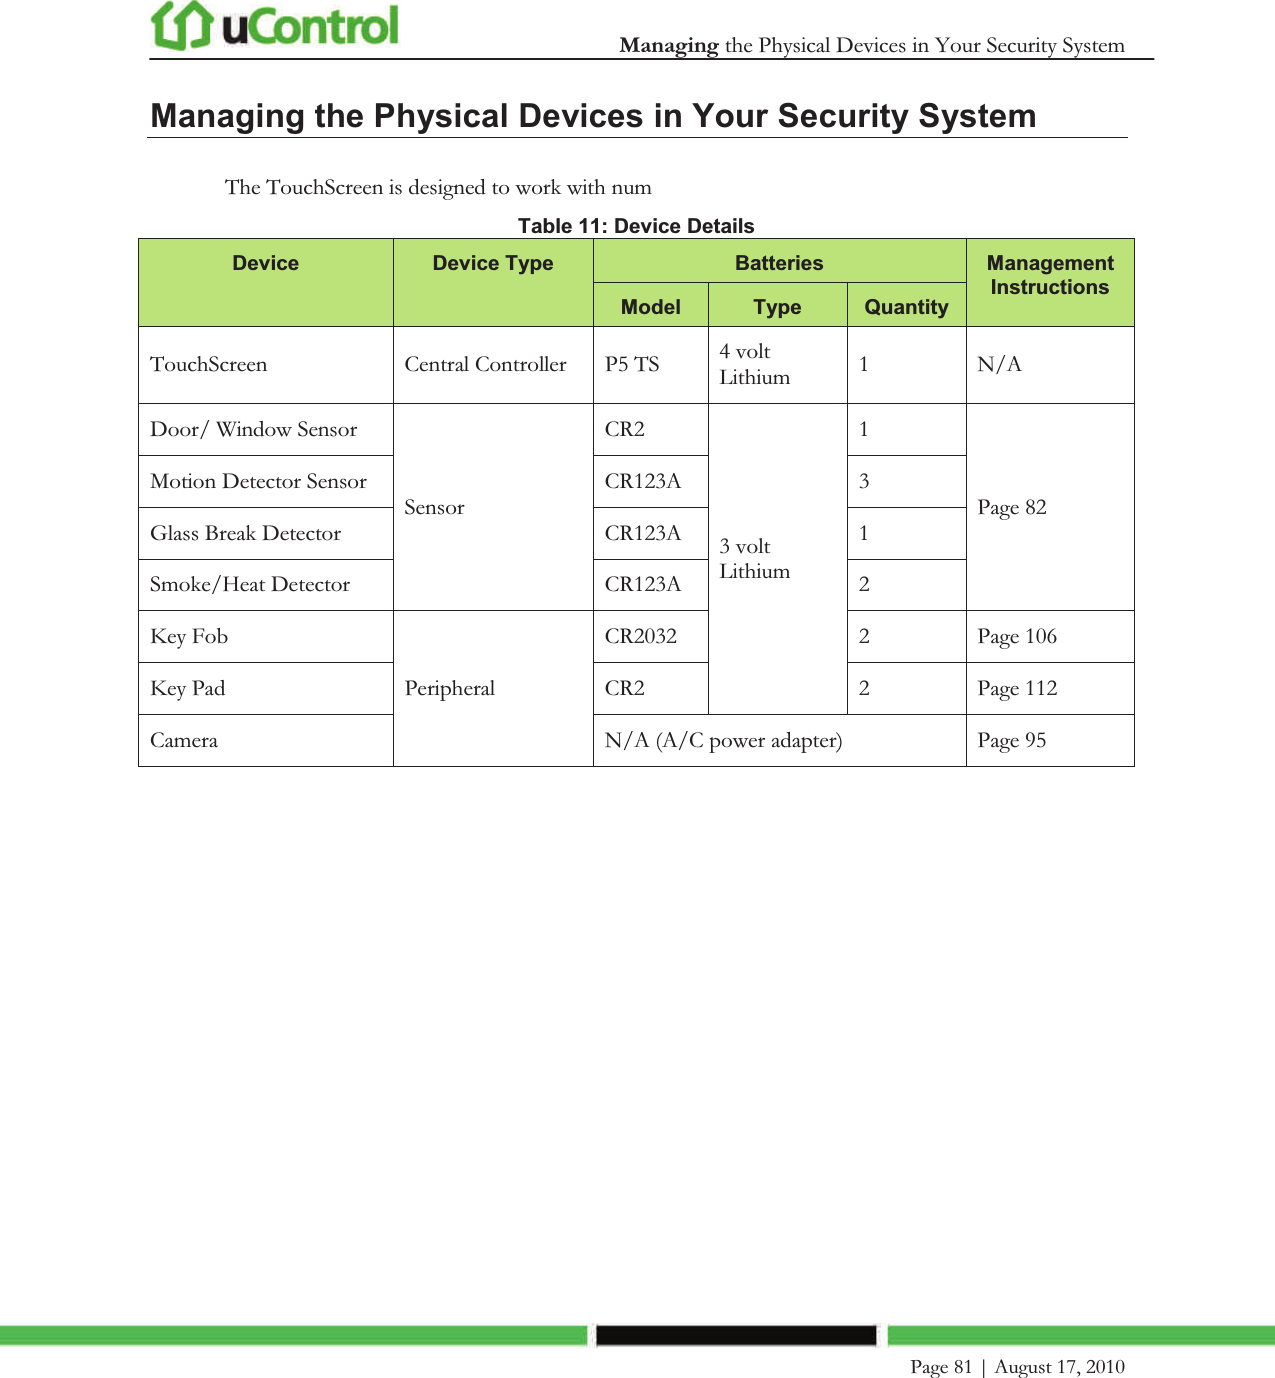  Managing the Physical Devices in Your Security System    Page 81 | August 17, 2010   Managing the Physical Devices in Your Security System The TouchScreen is designed to work with num Table 11: Device Details Device  Device Type Batteries Management Instructions Model Type Quantity TouchScreen  Central Controller P5 TS  4 volt Lithium  1  N/A Door/ Window Sensor Sensor CR2 3 volt Lithium 1 Page 82 Motion Detector Sensor CR123A 3 Glass Break Detector  CR123A 1 Smoke/Heat Detector  CR123A 2 Key Fob Peripheral CR2032  2  Page 106 Key Pad  CR2  2  Page 112 Camera  N/A (A/C power adapter)  Page 95   